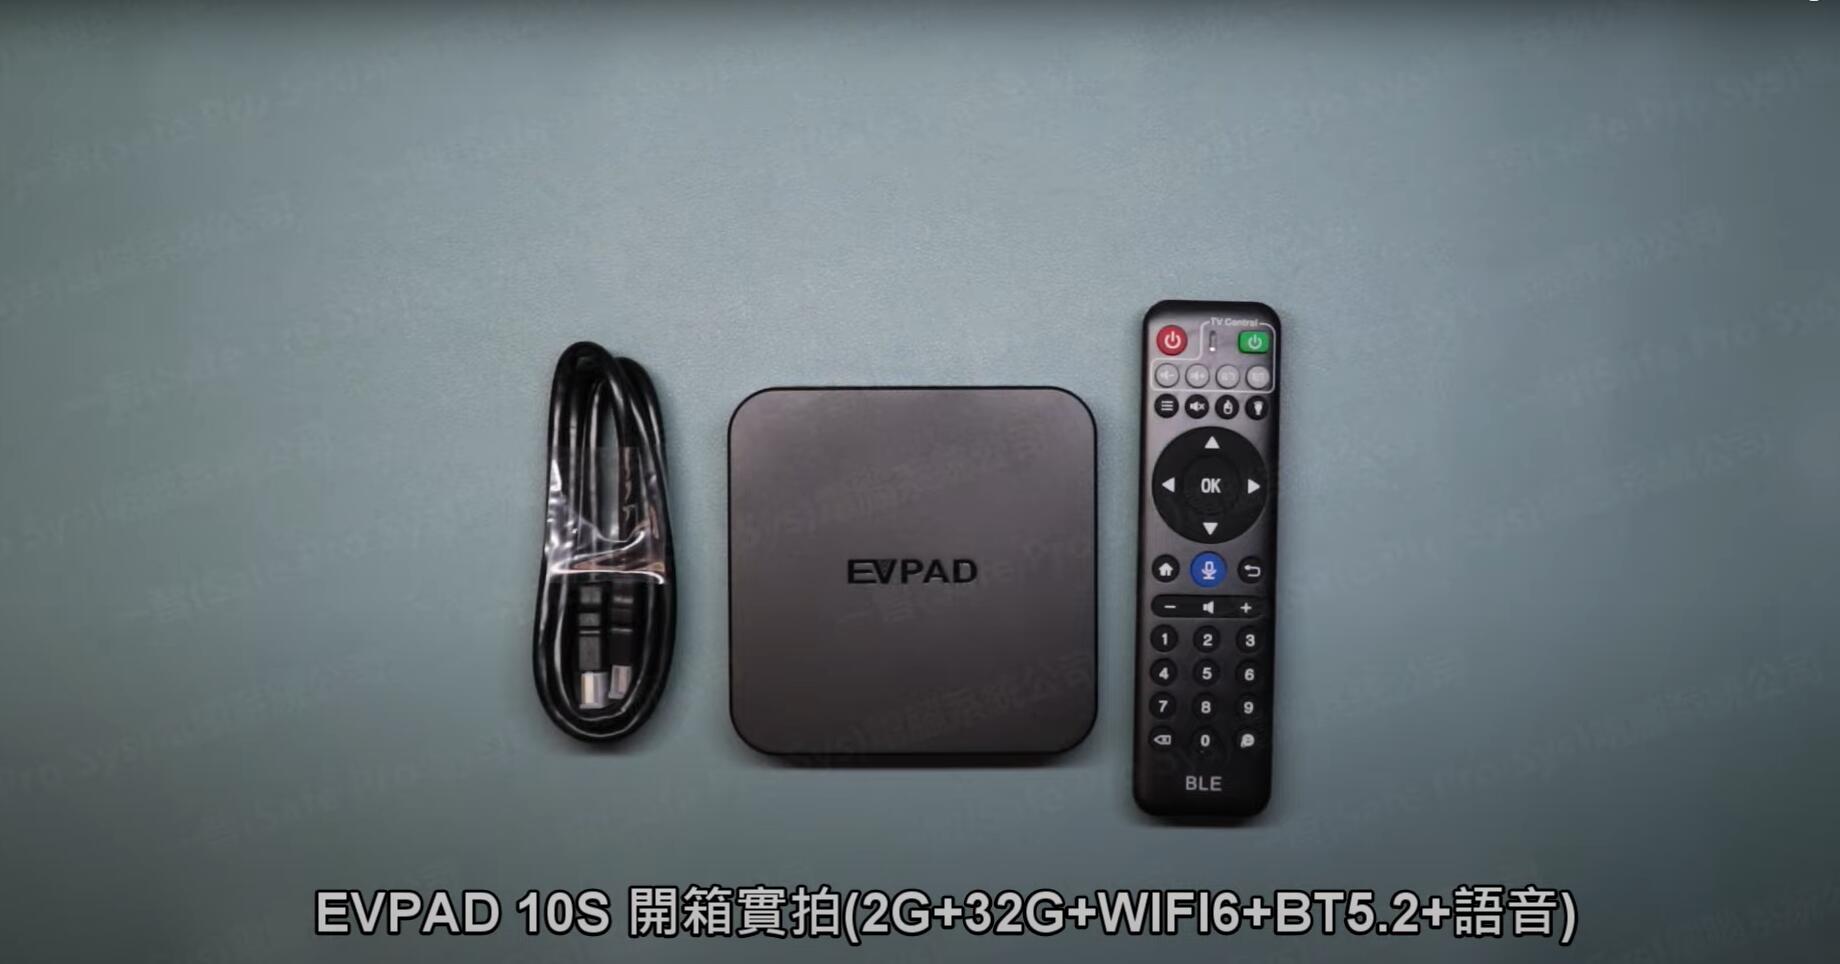 EVPAD 10S TV Box Packing & Real Photo